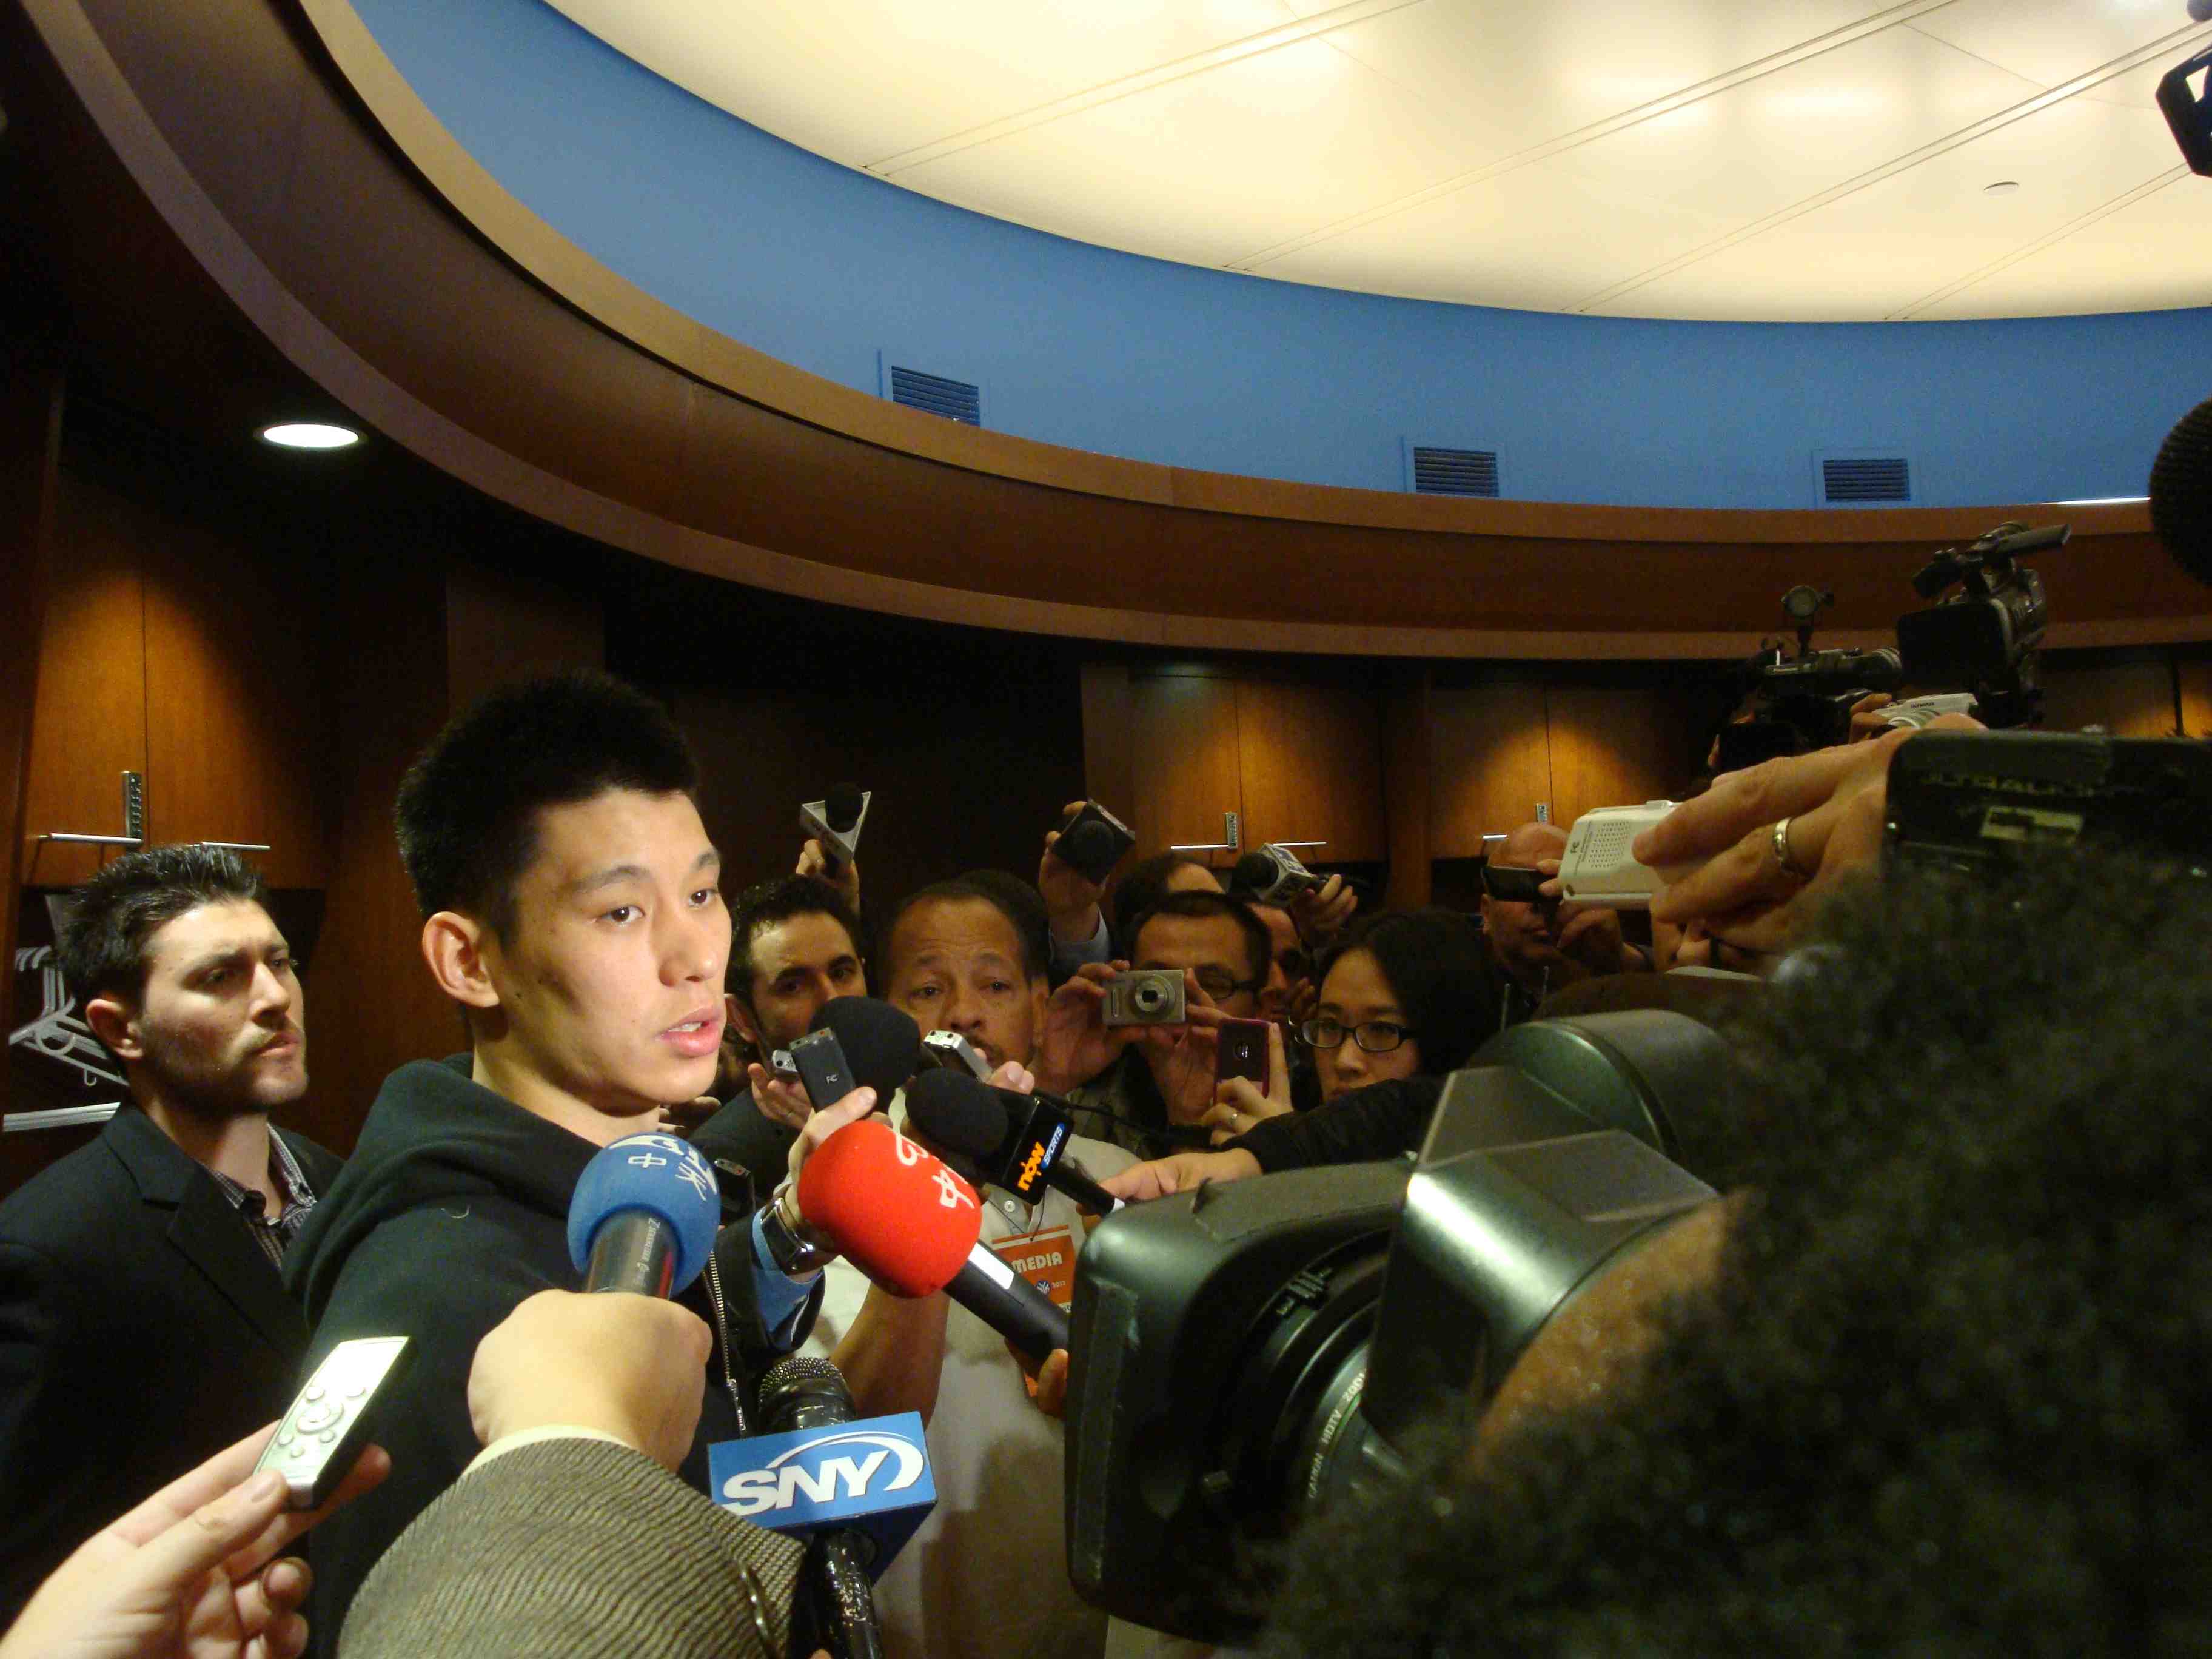 Go See Linsanity the documentary  Photo: Jeremy Lin in the Knicks locker room at Madison Square Garden March 11, 2012 Photo by Suzanne Joe Kai for AsianConnections.com